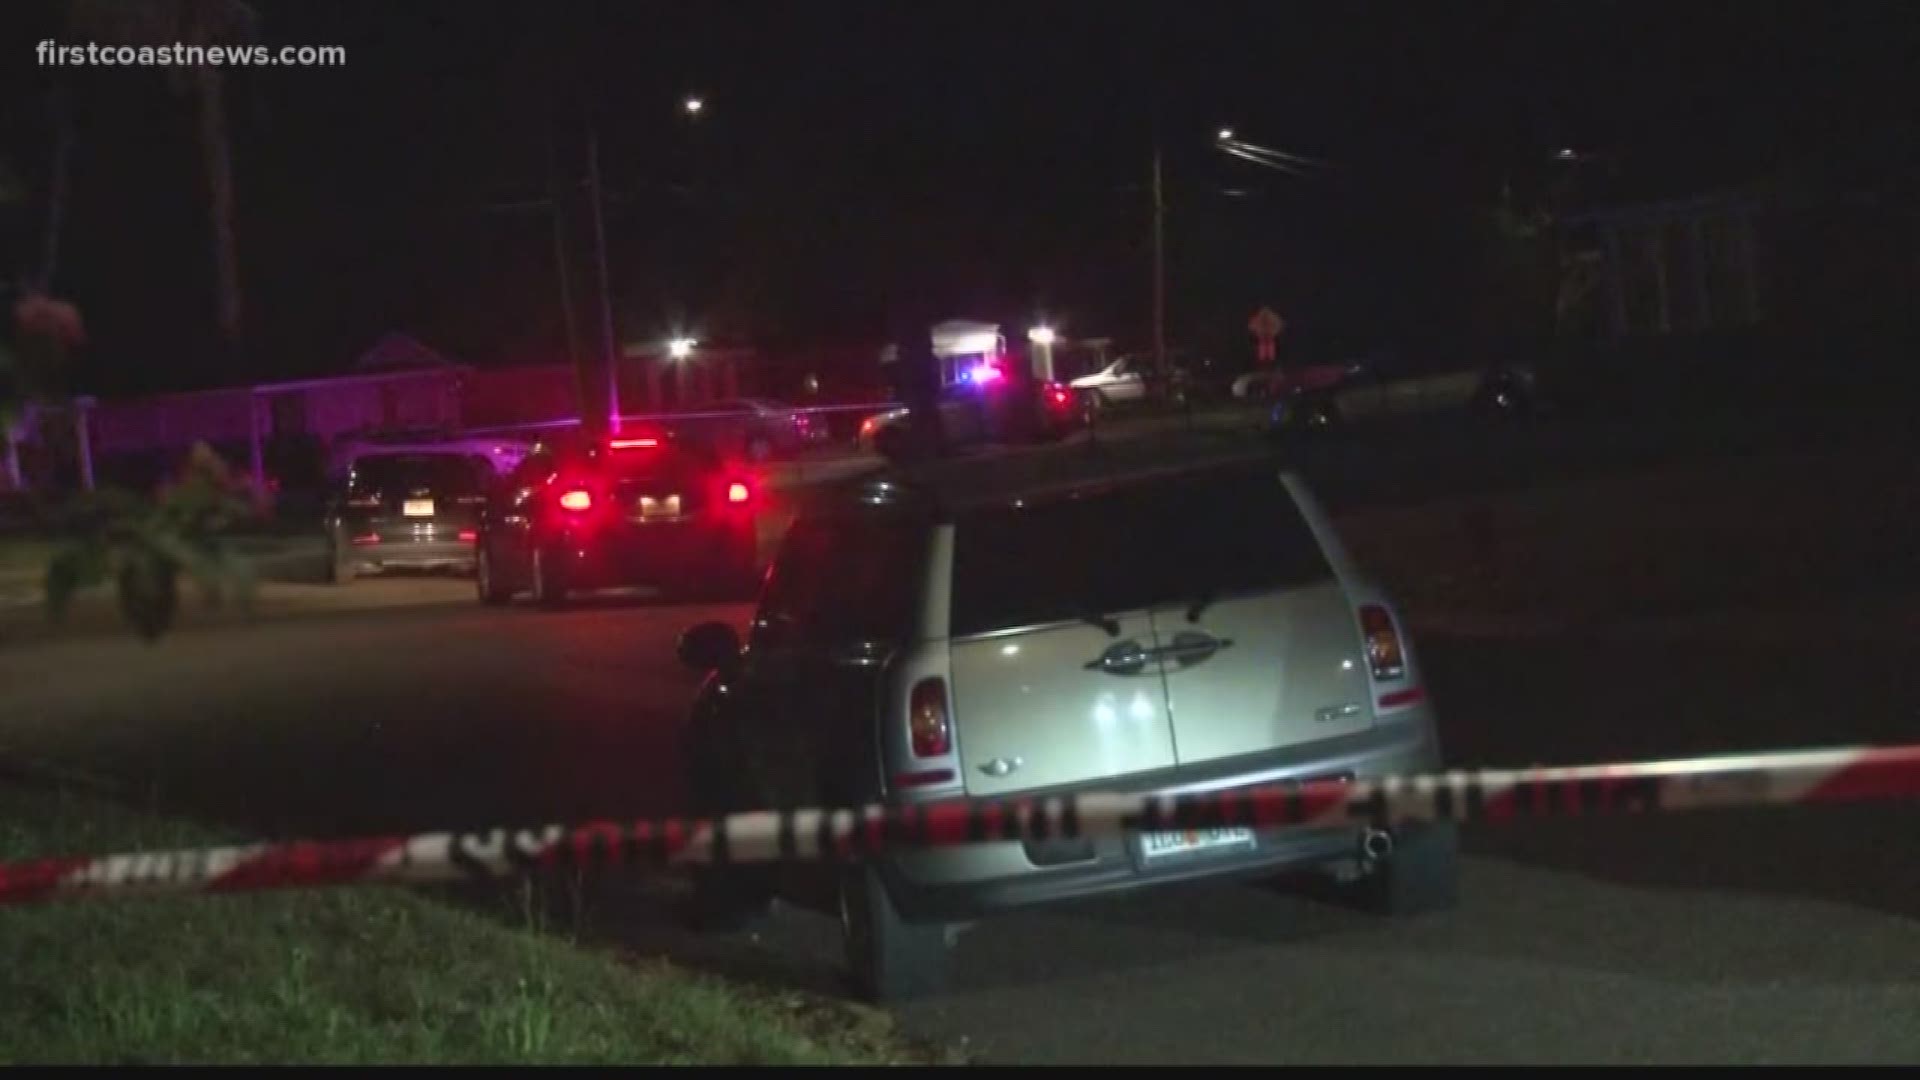 One person is dead after a reported shooting in the Highlands neighborhood Saturday night.